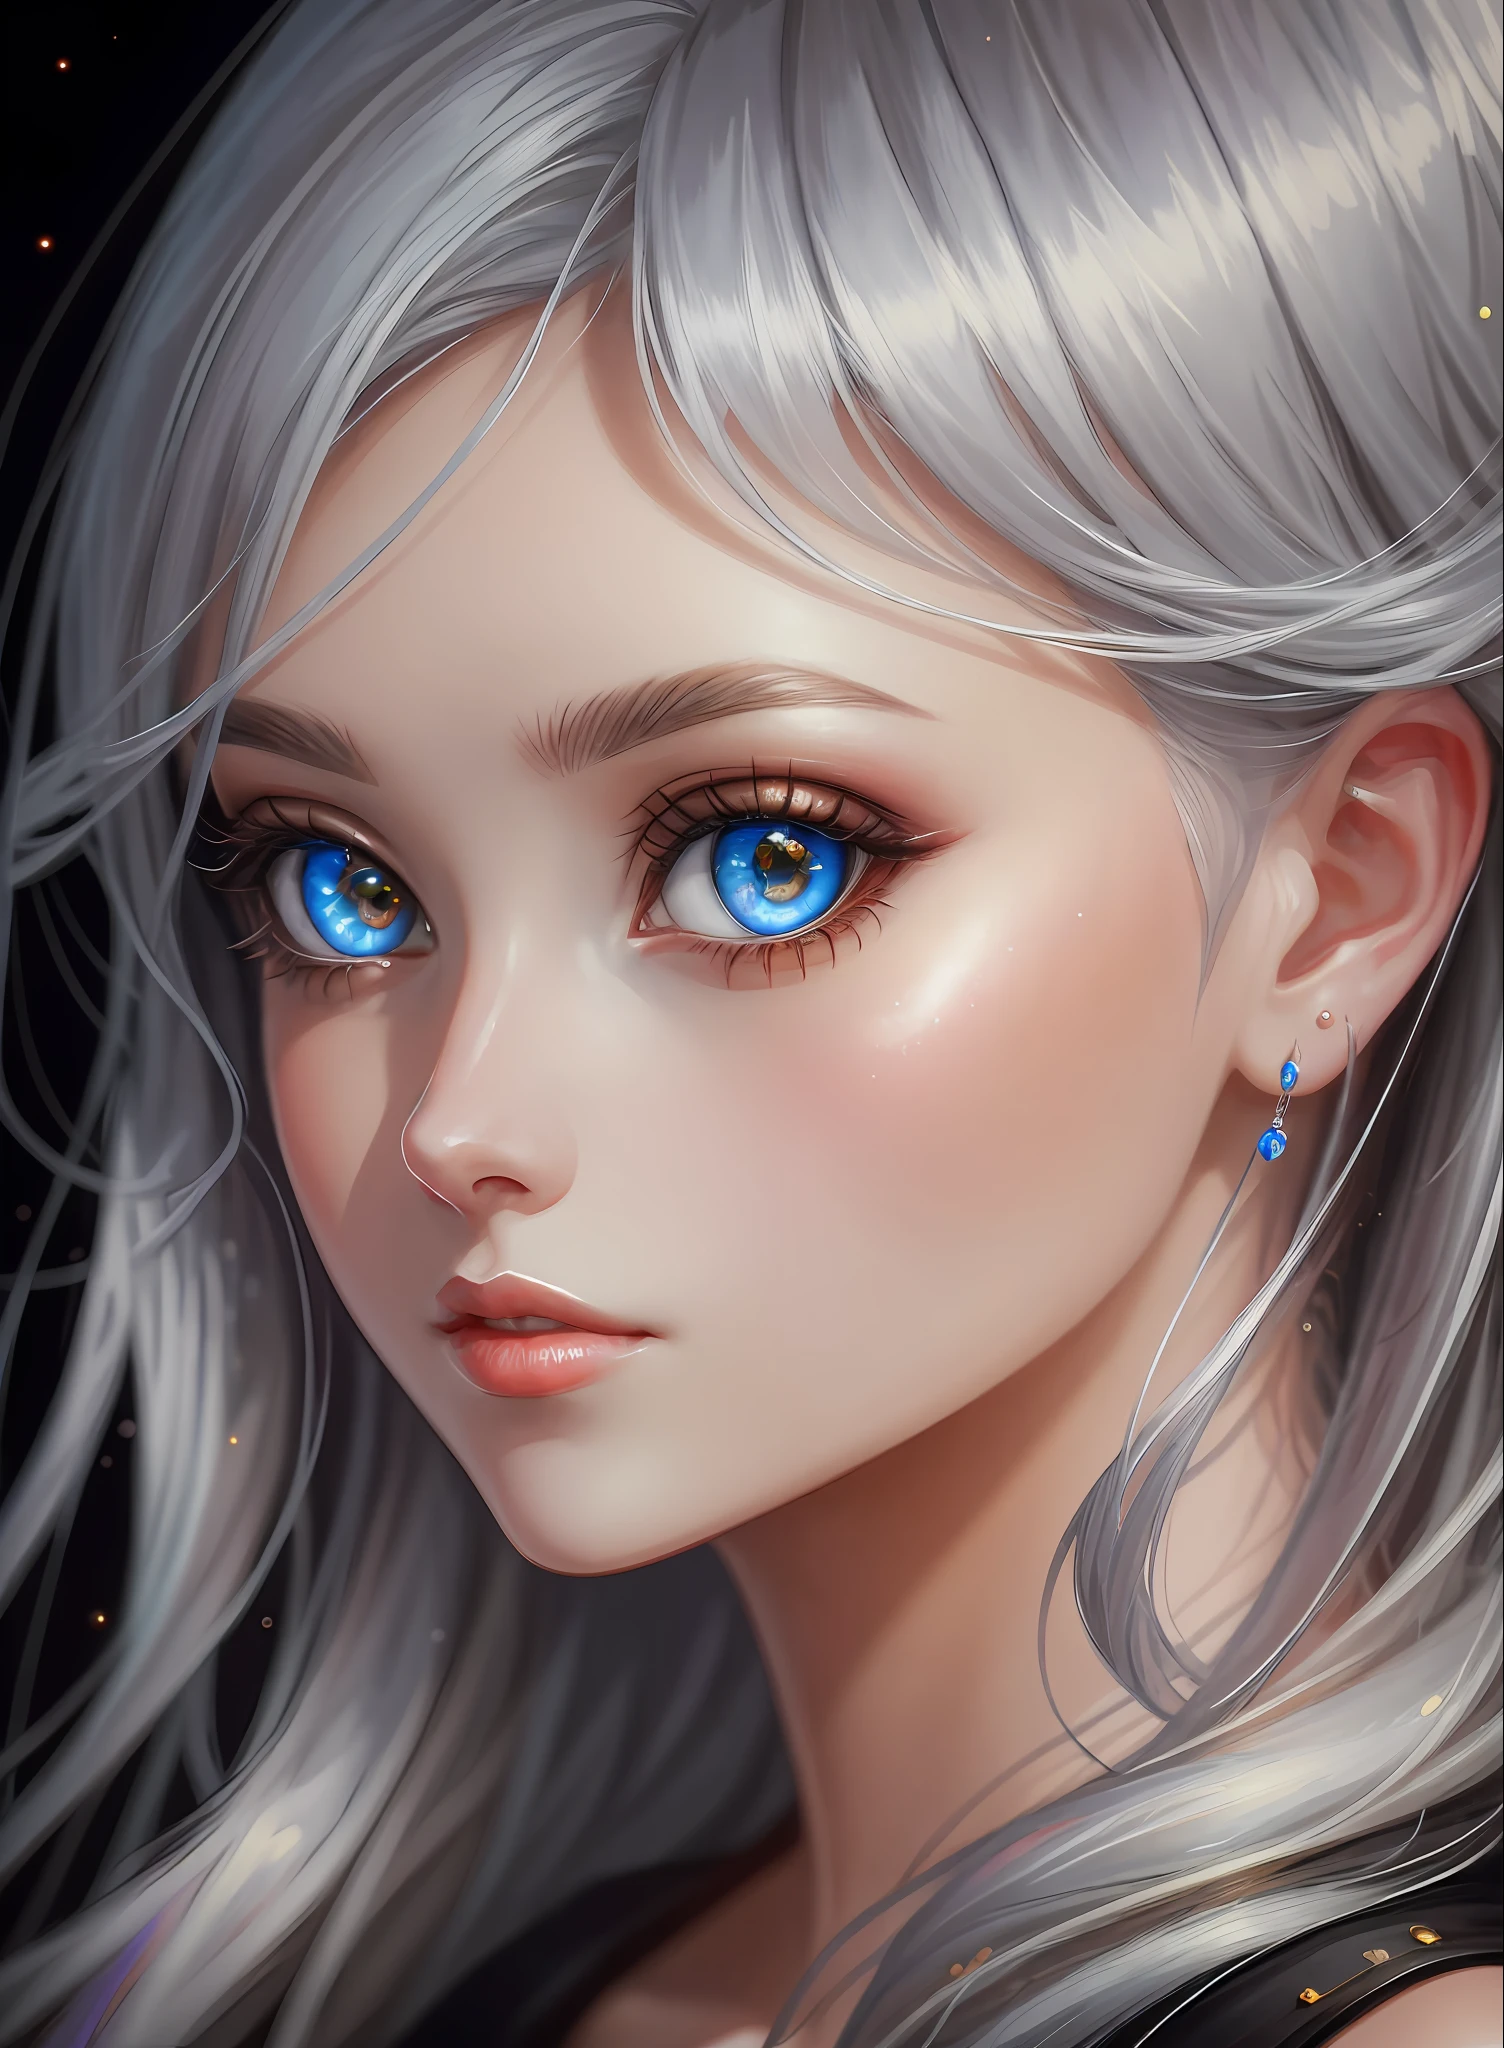 ((Best Quality)), ((Masterpiece)), (Real)), (Detail),Anime Style, (1 woman) Close-up portrait of a silver-haired pretty woman, beautifully shining eyes like crystal clear glass, 4K high-definition digital art, stunning digital illustrations, stunning 8K artwork, colorful digital fantasy art, colorful and bright, beautiful digital artwork, colorful digital painting, digital anime art, portrait of beautiful and pretty woman, 8k hd digital wallpaper art, digital painting